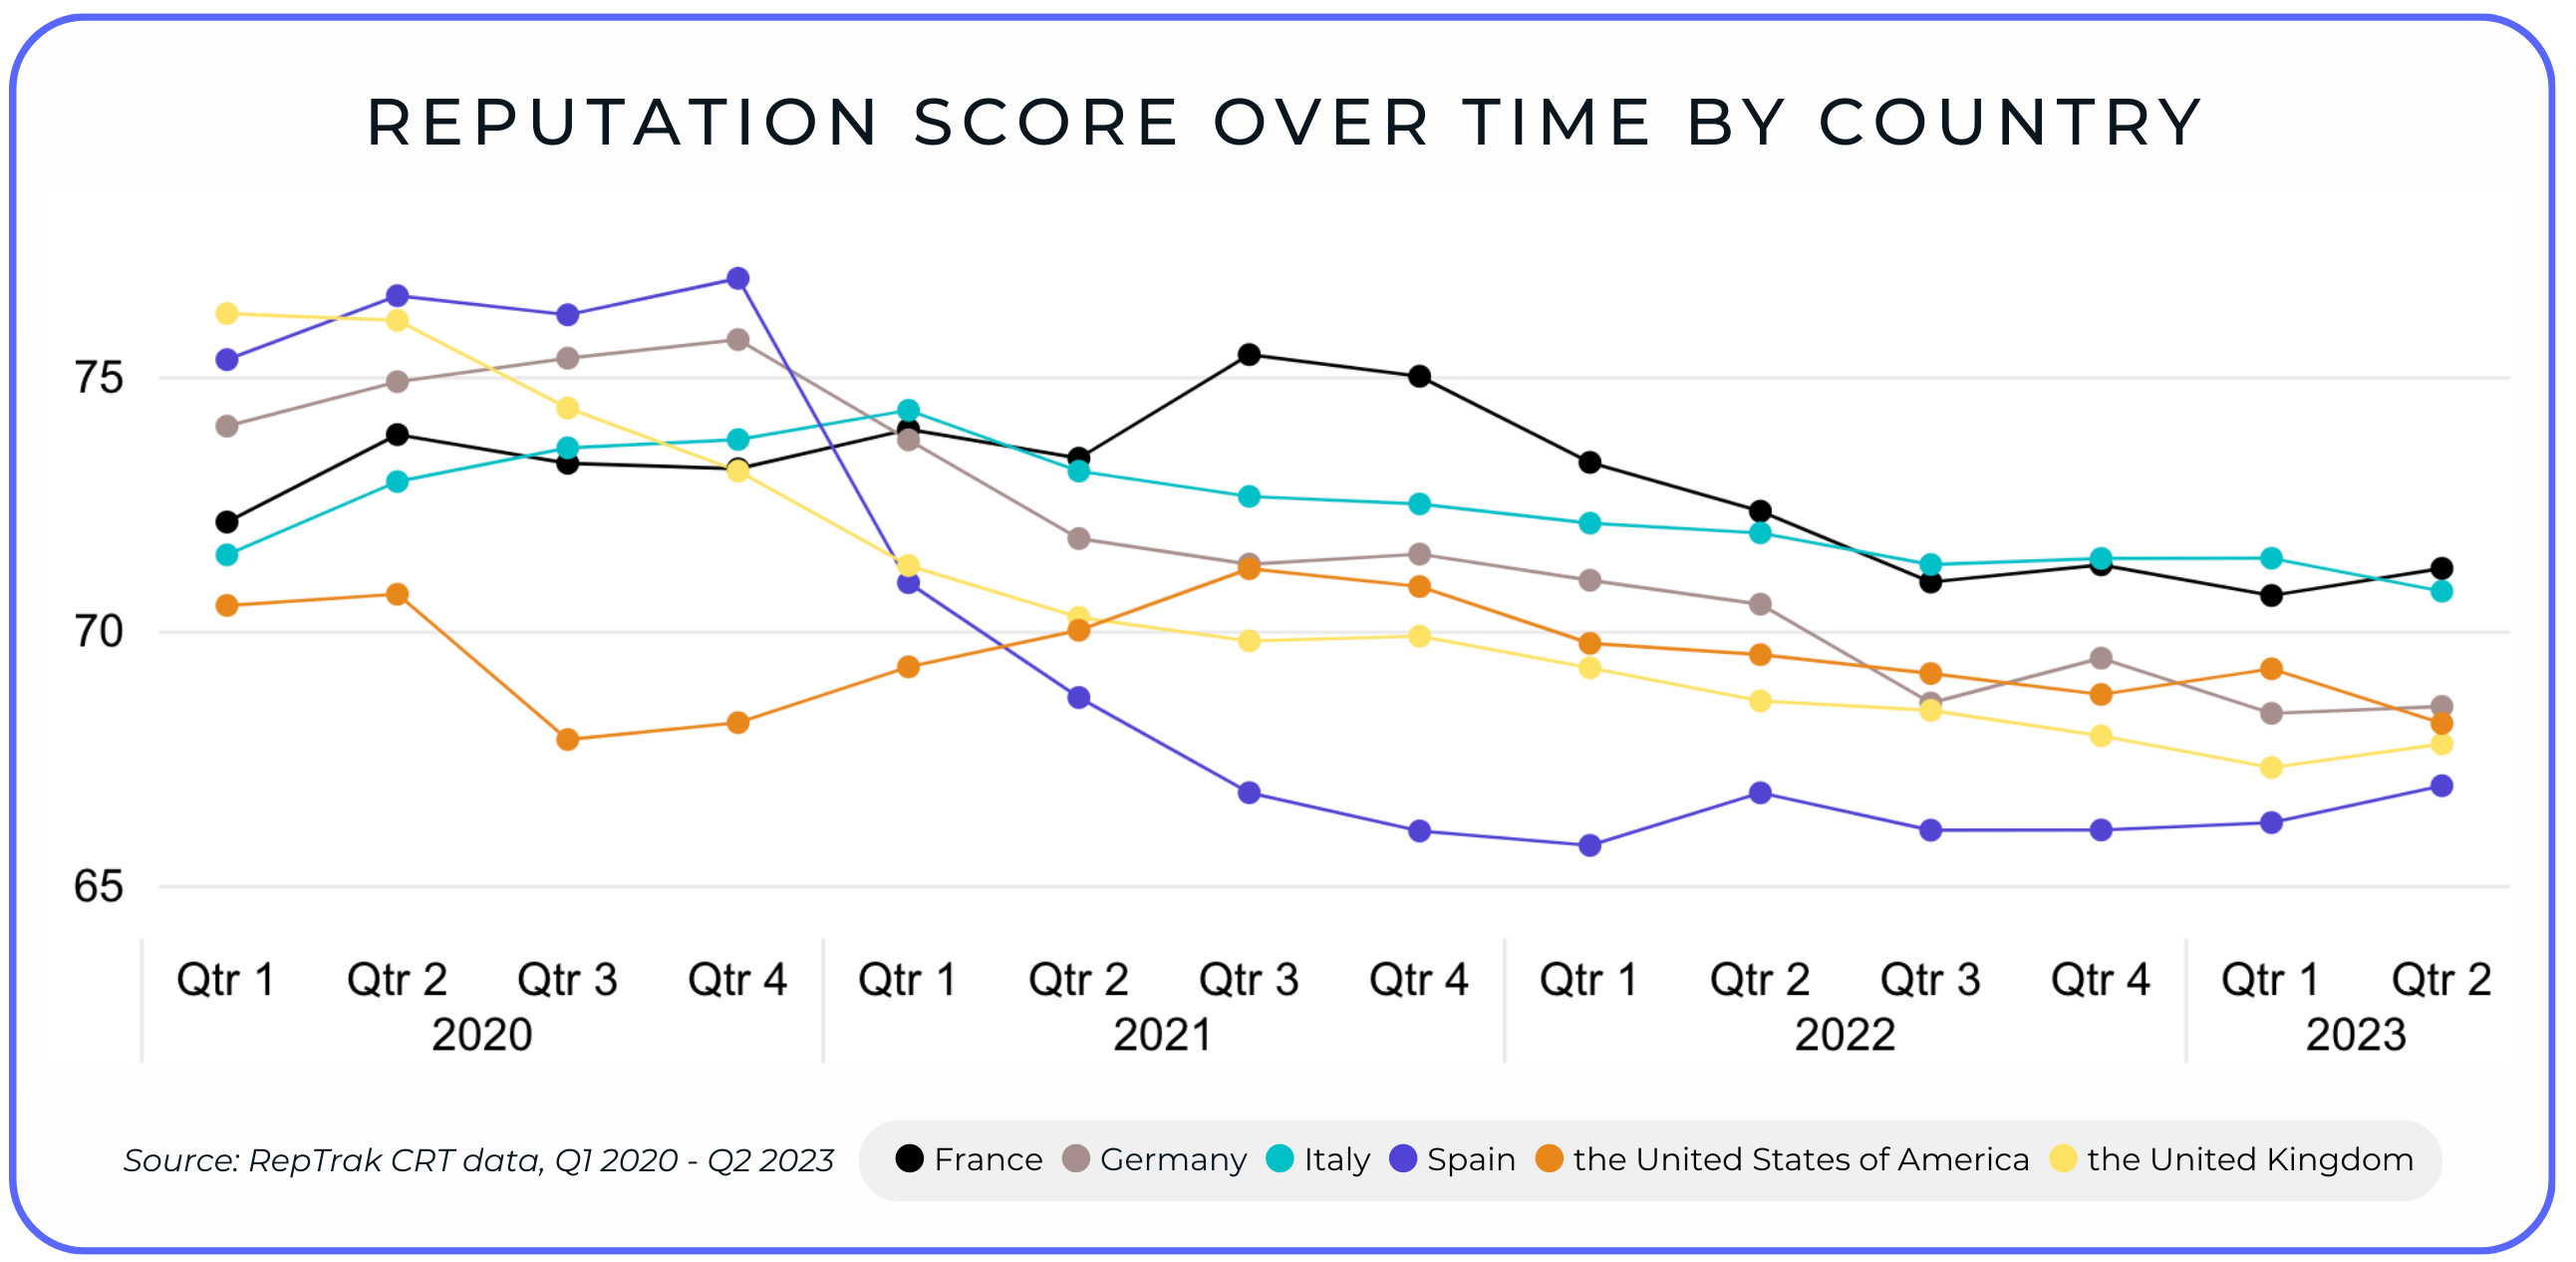 Reputation Score over time by country